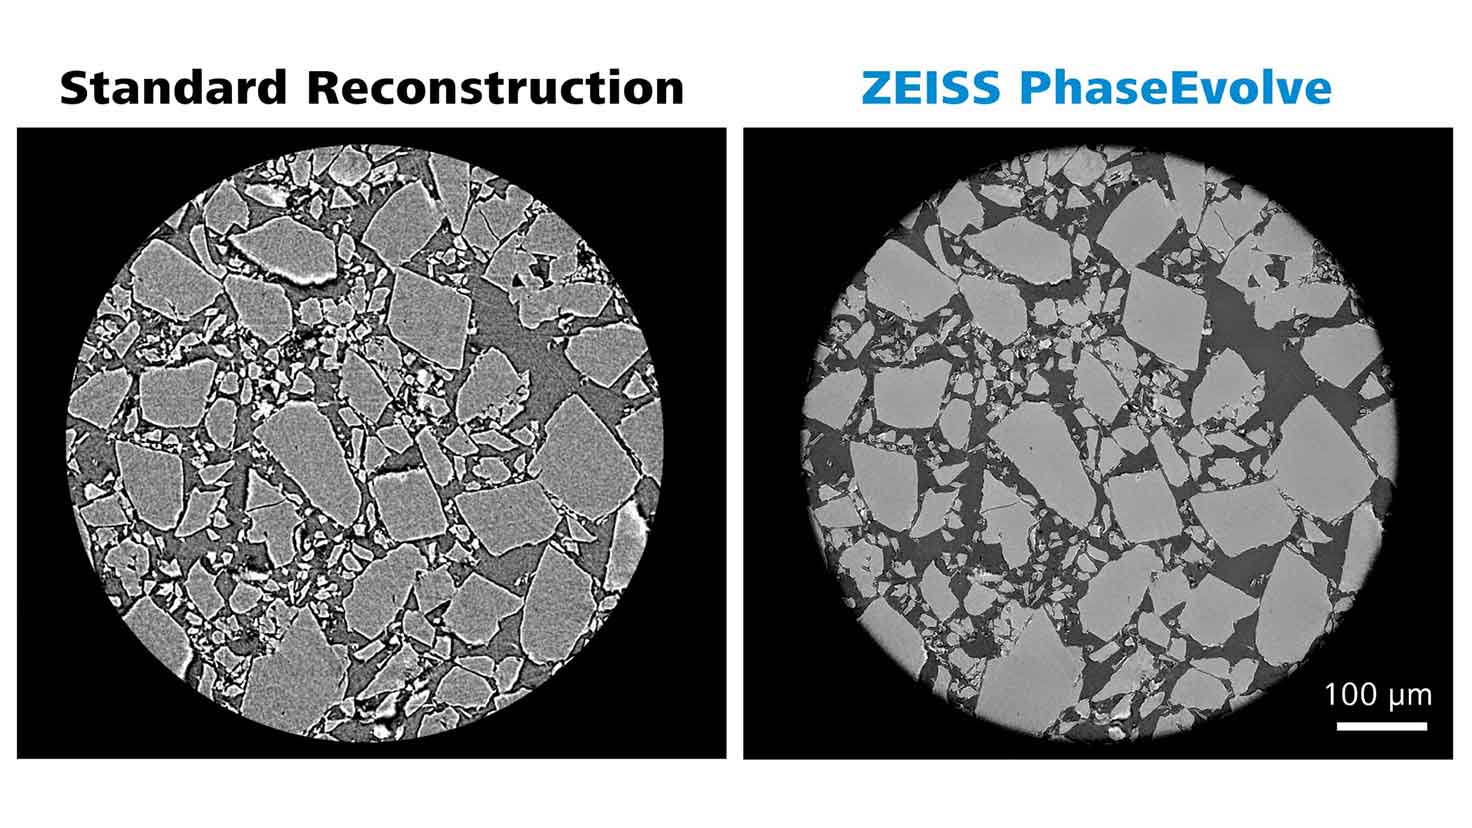 Application of ZEISS PhaseEvolve to a pharmaceutical powder sample.